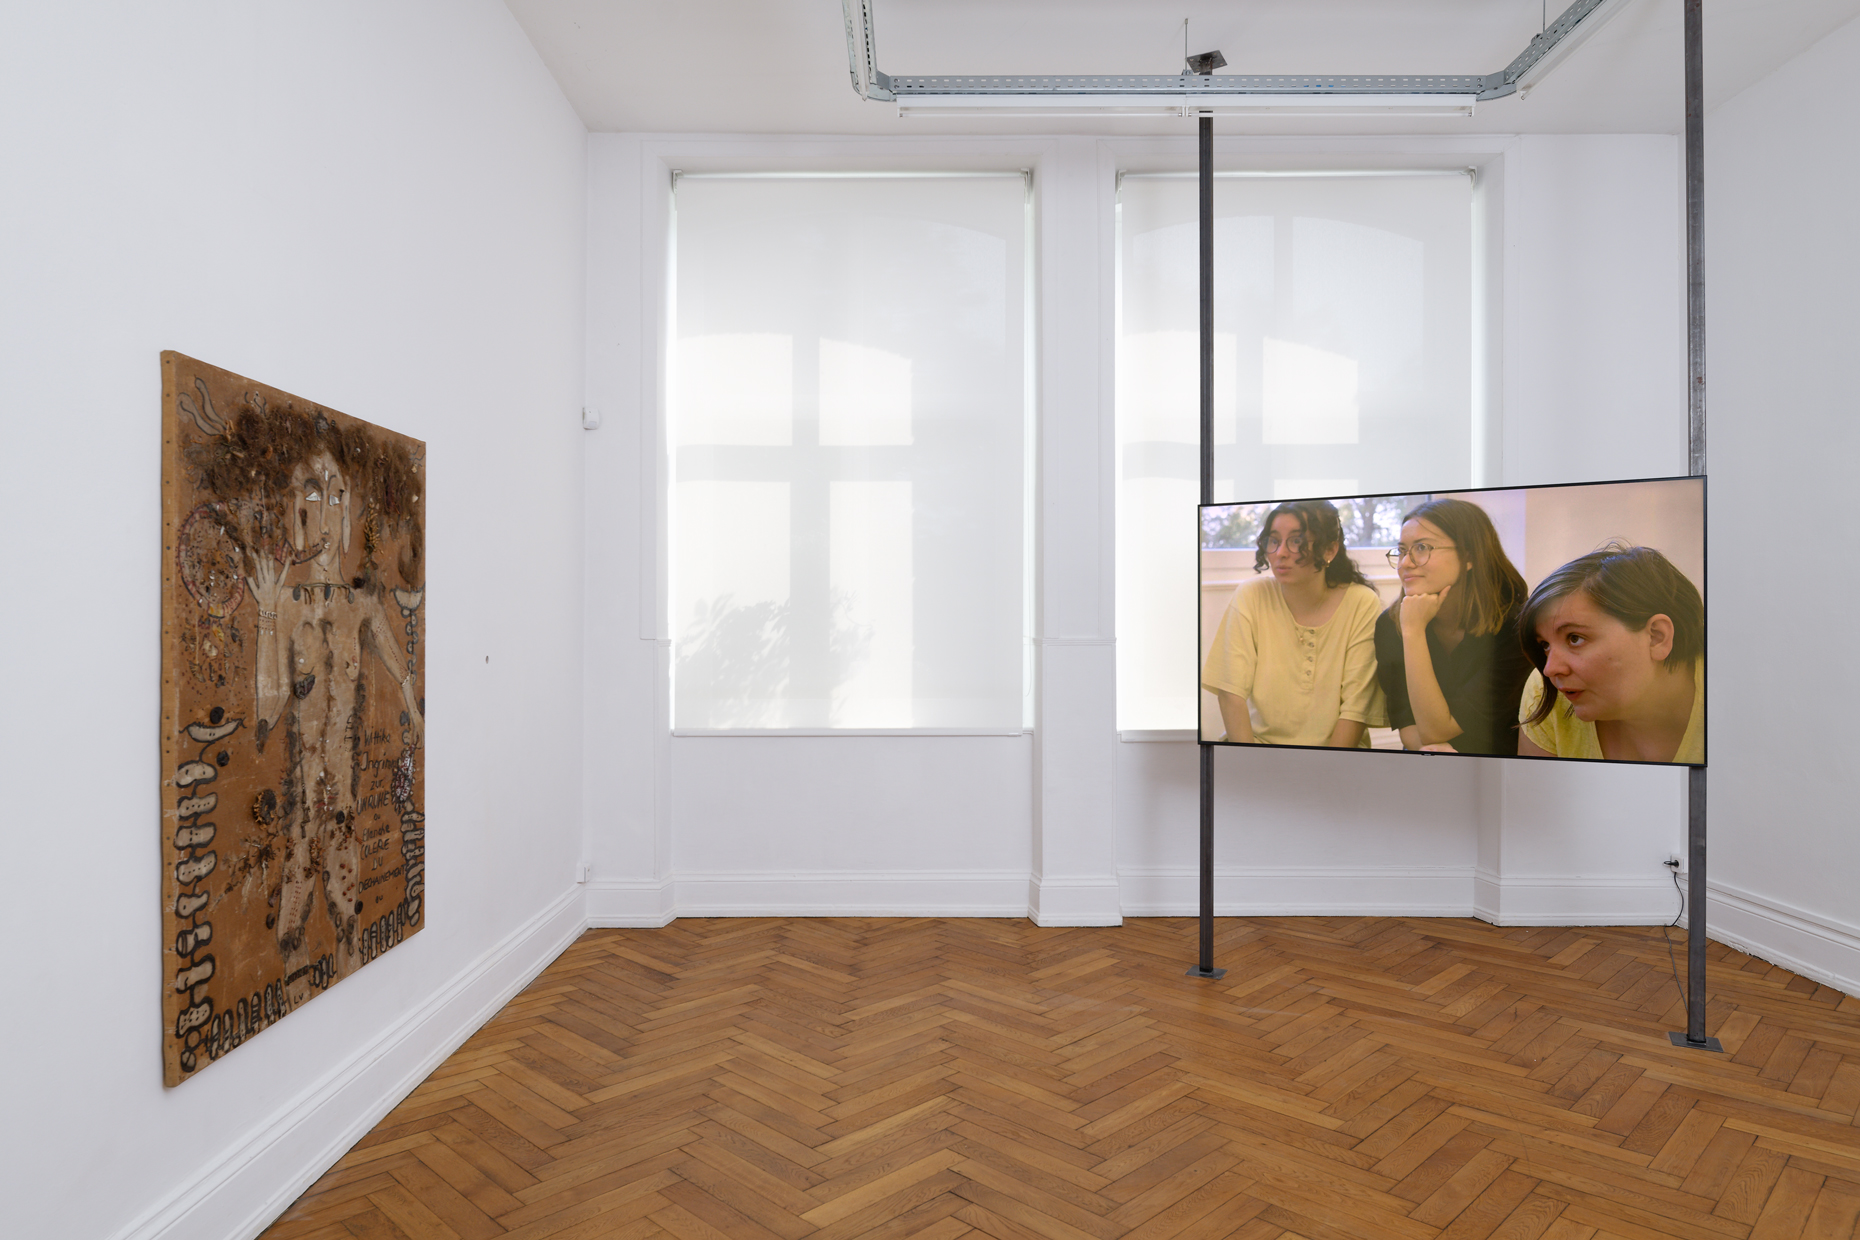 A bright room with wooden floors, white walls, to the left a large collage hangs on the wall and the the left is a screen picturing three young people looking introspectively towards the direction of the collage.